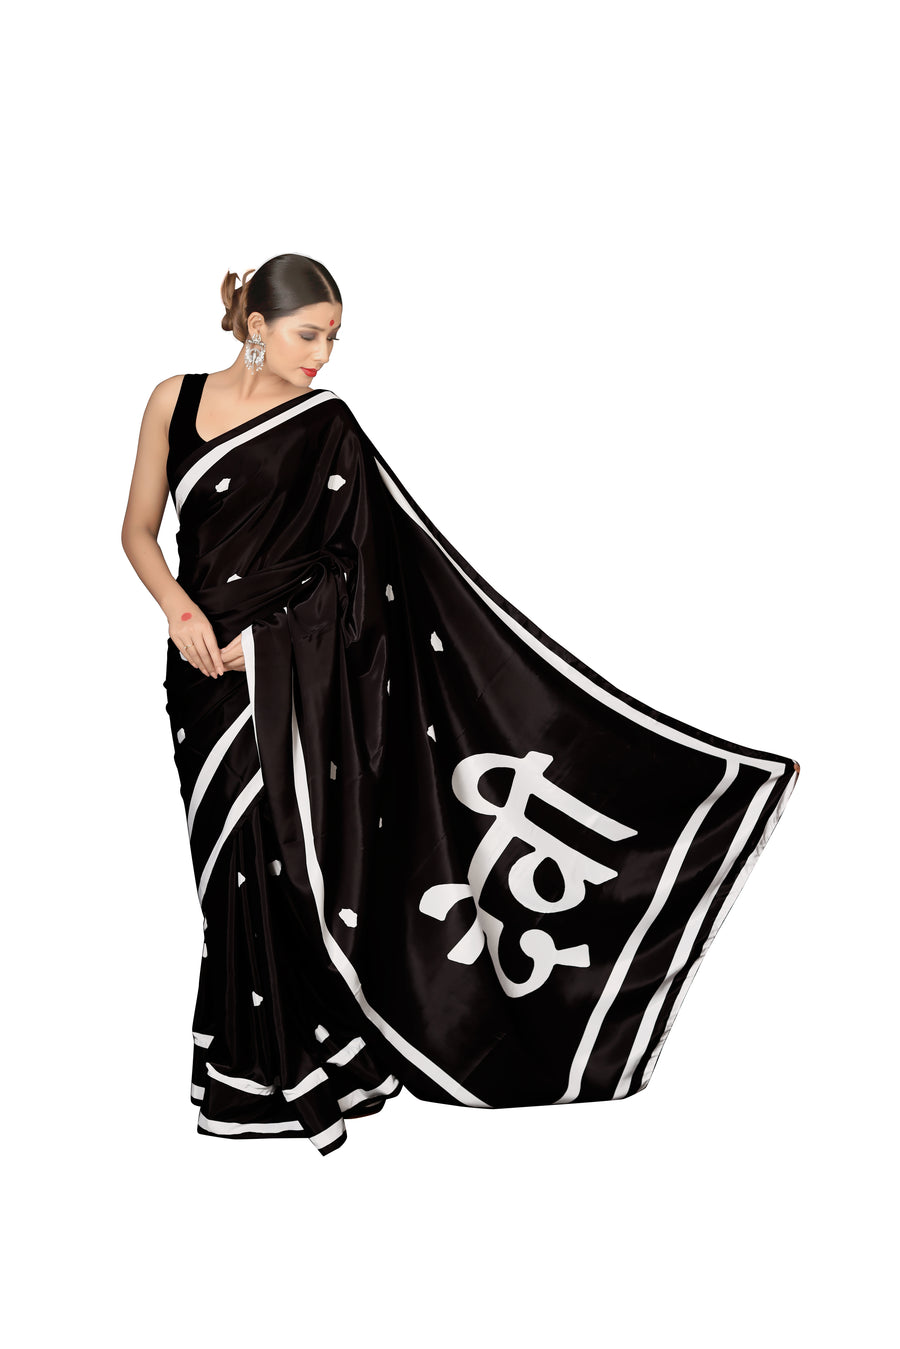 Devi Saree - The Strength within You